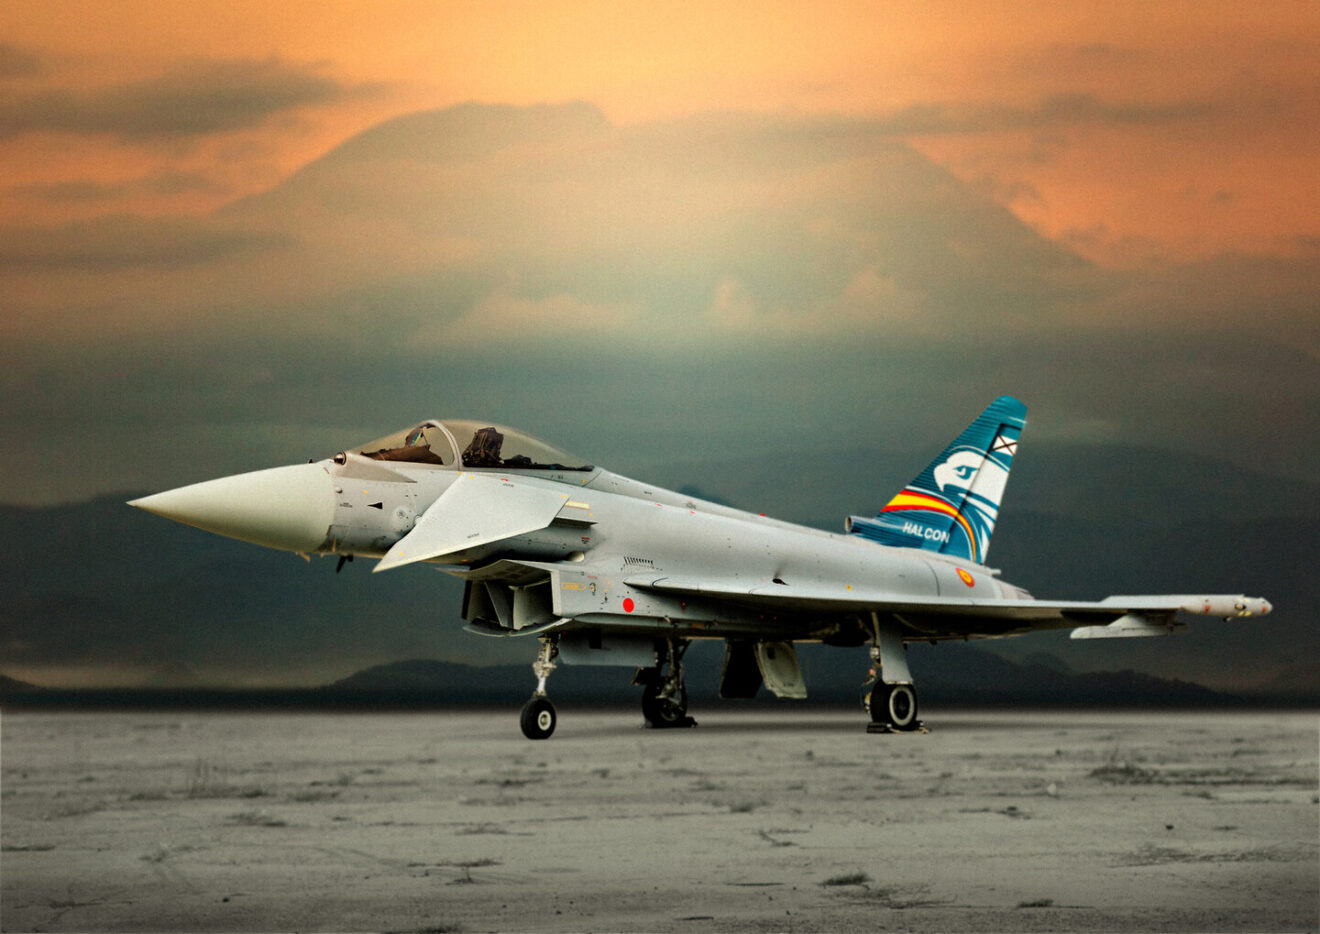 Up to 26,000 jobs secured in Spain until 2060 with latest Eurofighter contracts